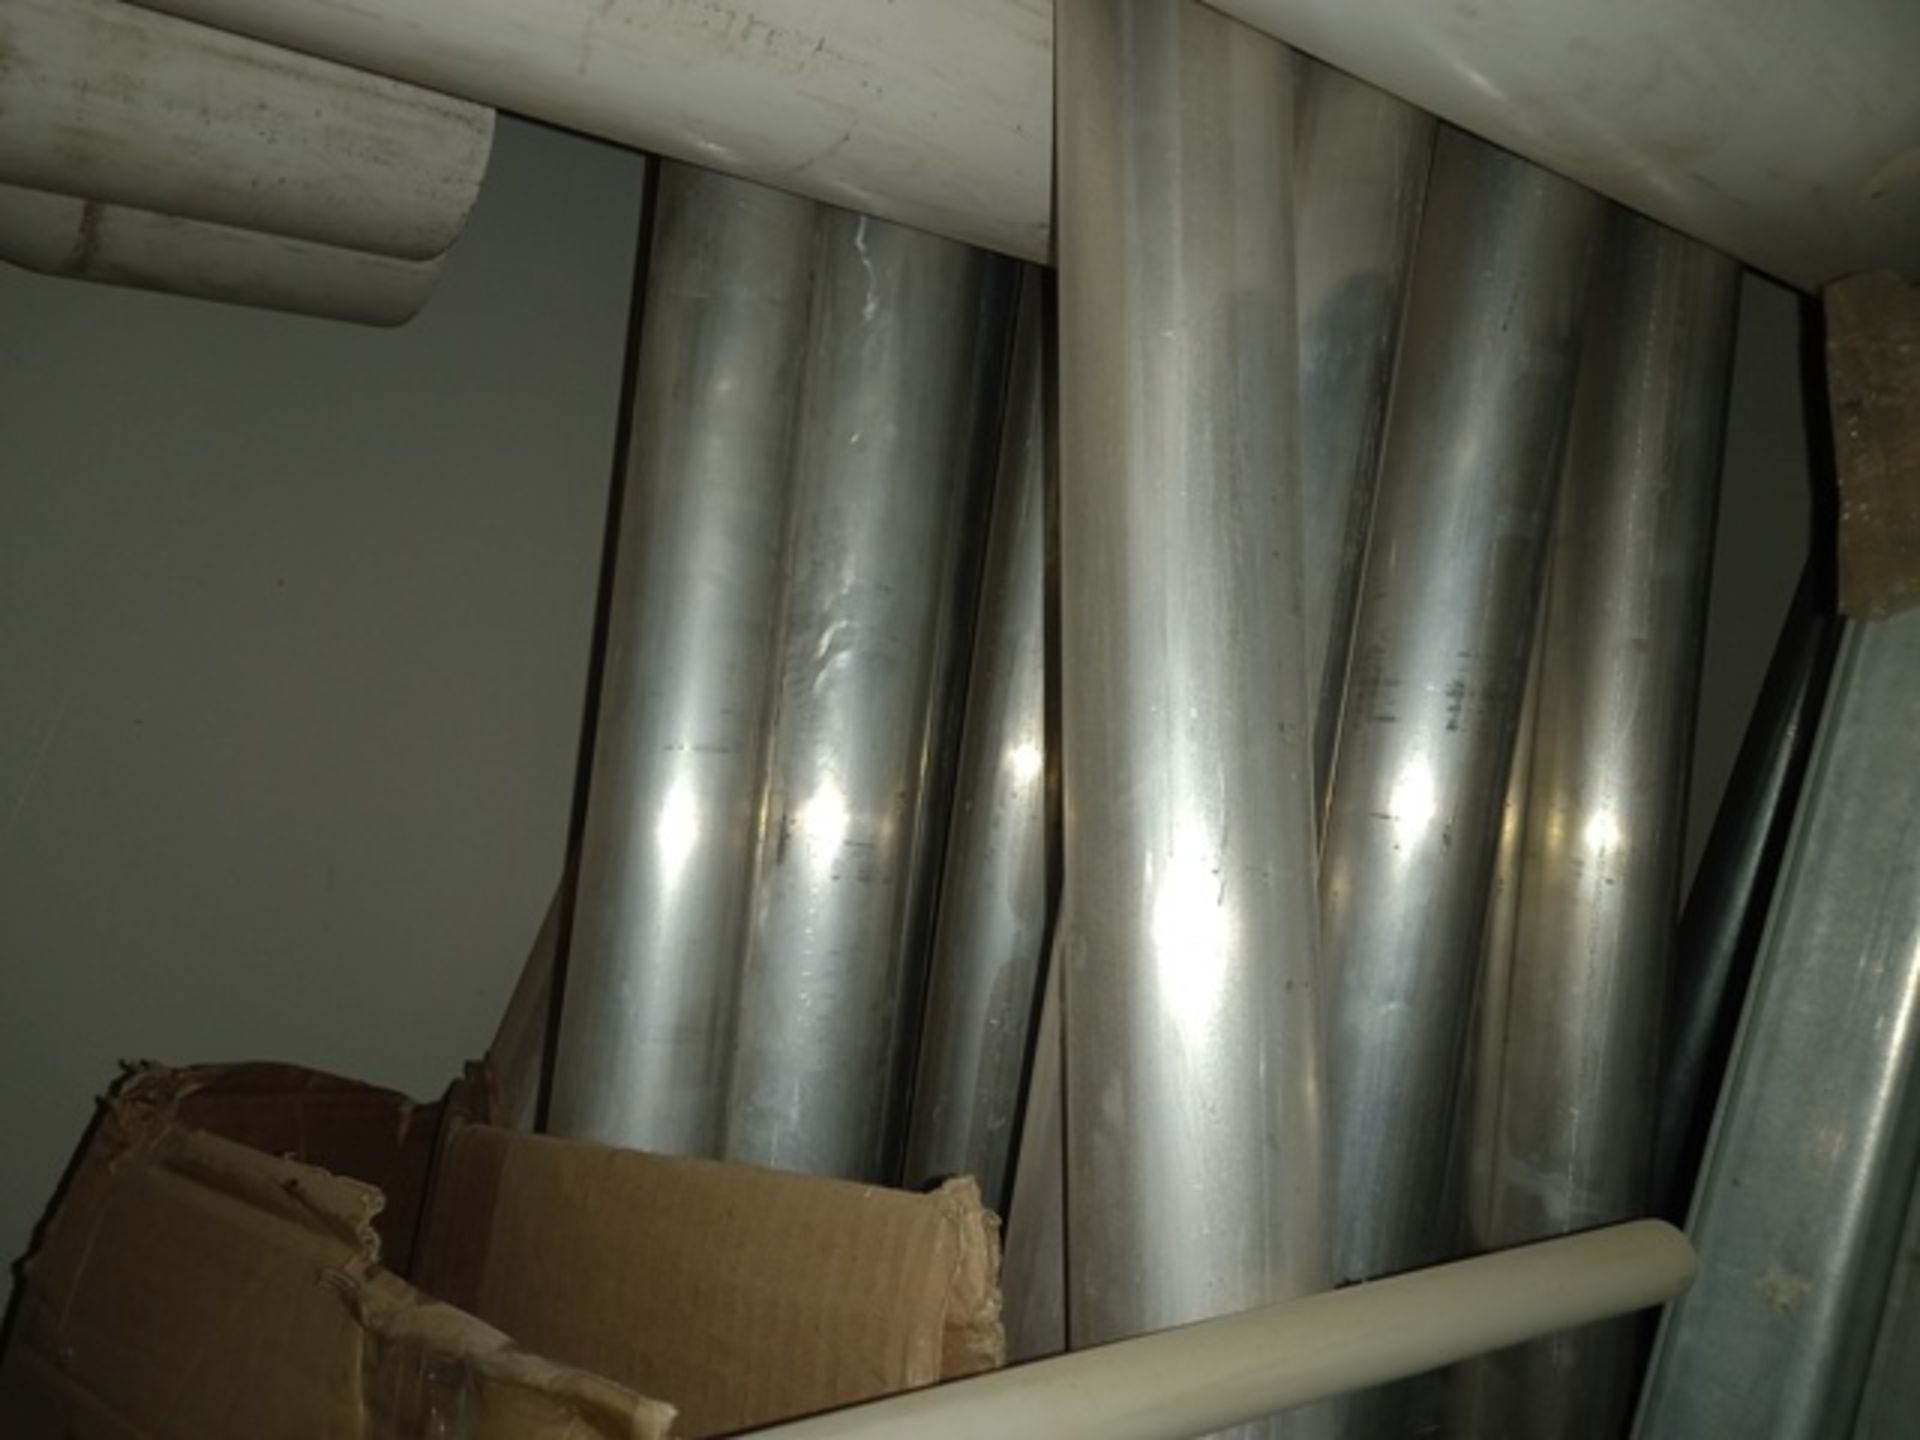 Lot Of (25) Aluminum Pipe 2-1/2 Inch X 6 M And (1) Aluminum Pipe 1/2 Inch x 3 M - Image 4 of 4